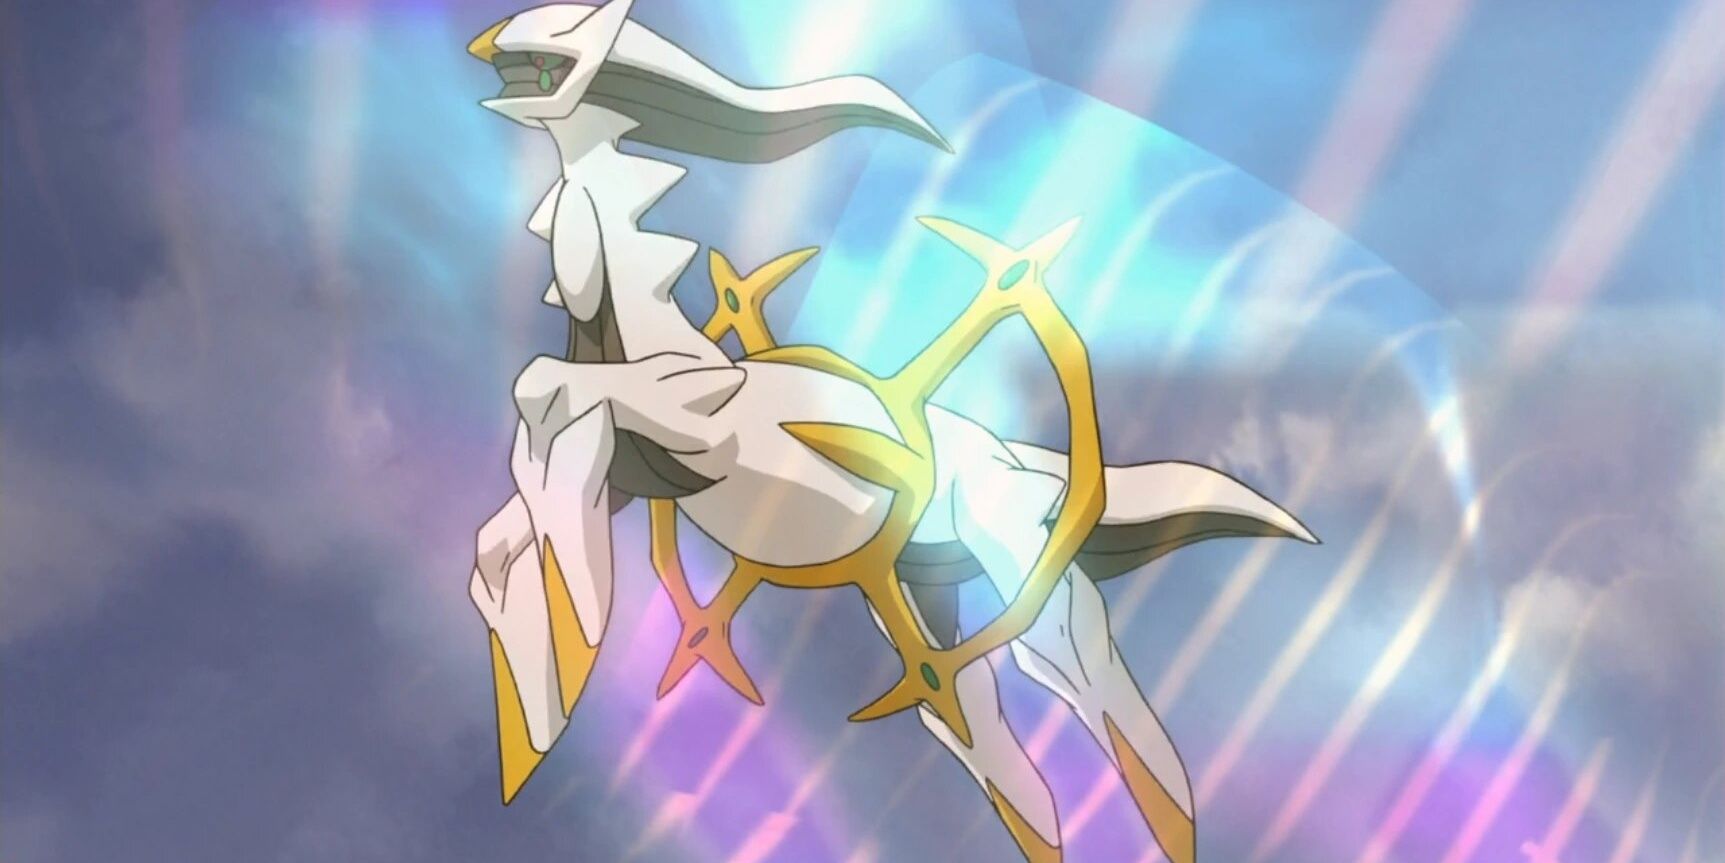 Pokemon anime Arceus leaping in the air